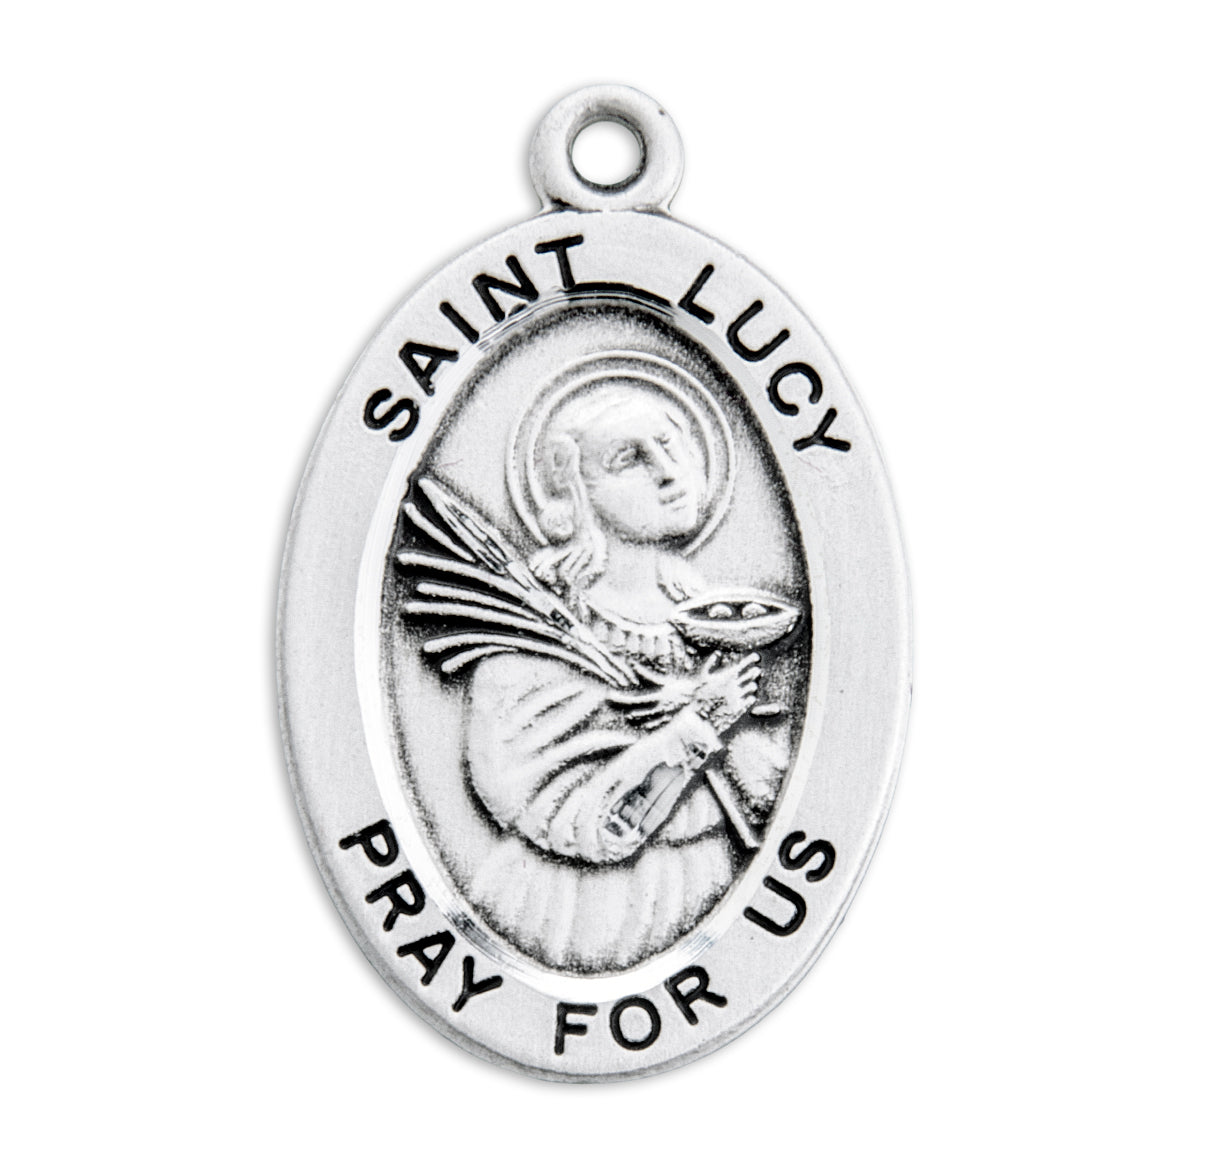 Patron Saint Lucy Oval Sterling Silver Medal